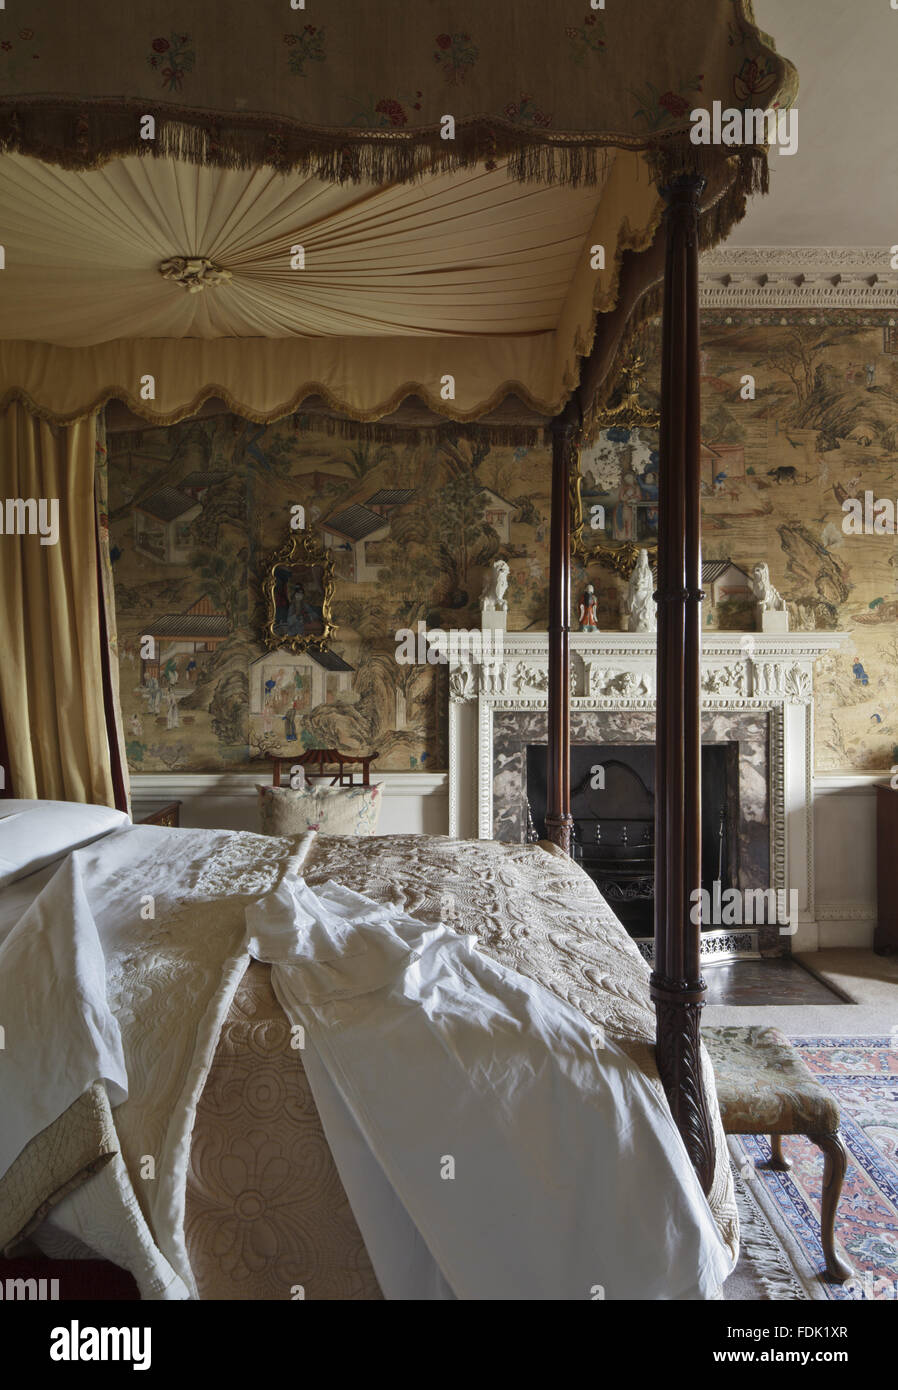 The Chinese Chippendale Bedroom at Saltram, Devon. The silk wallpaper is a 'factory' paper with scenes from everyday life in China. The mahogany four-poster bed, c.1760, was possibly supplied by Thomas Chippendale. Stock Photo